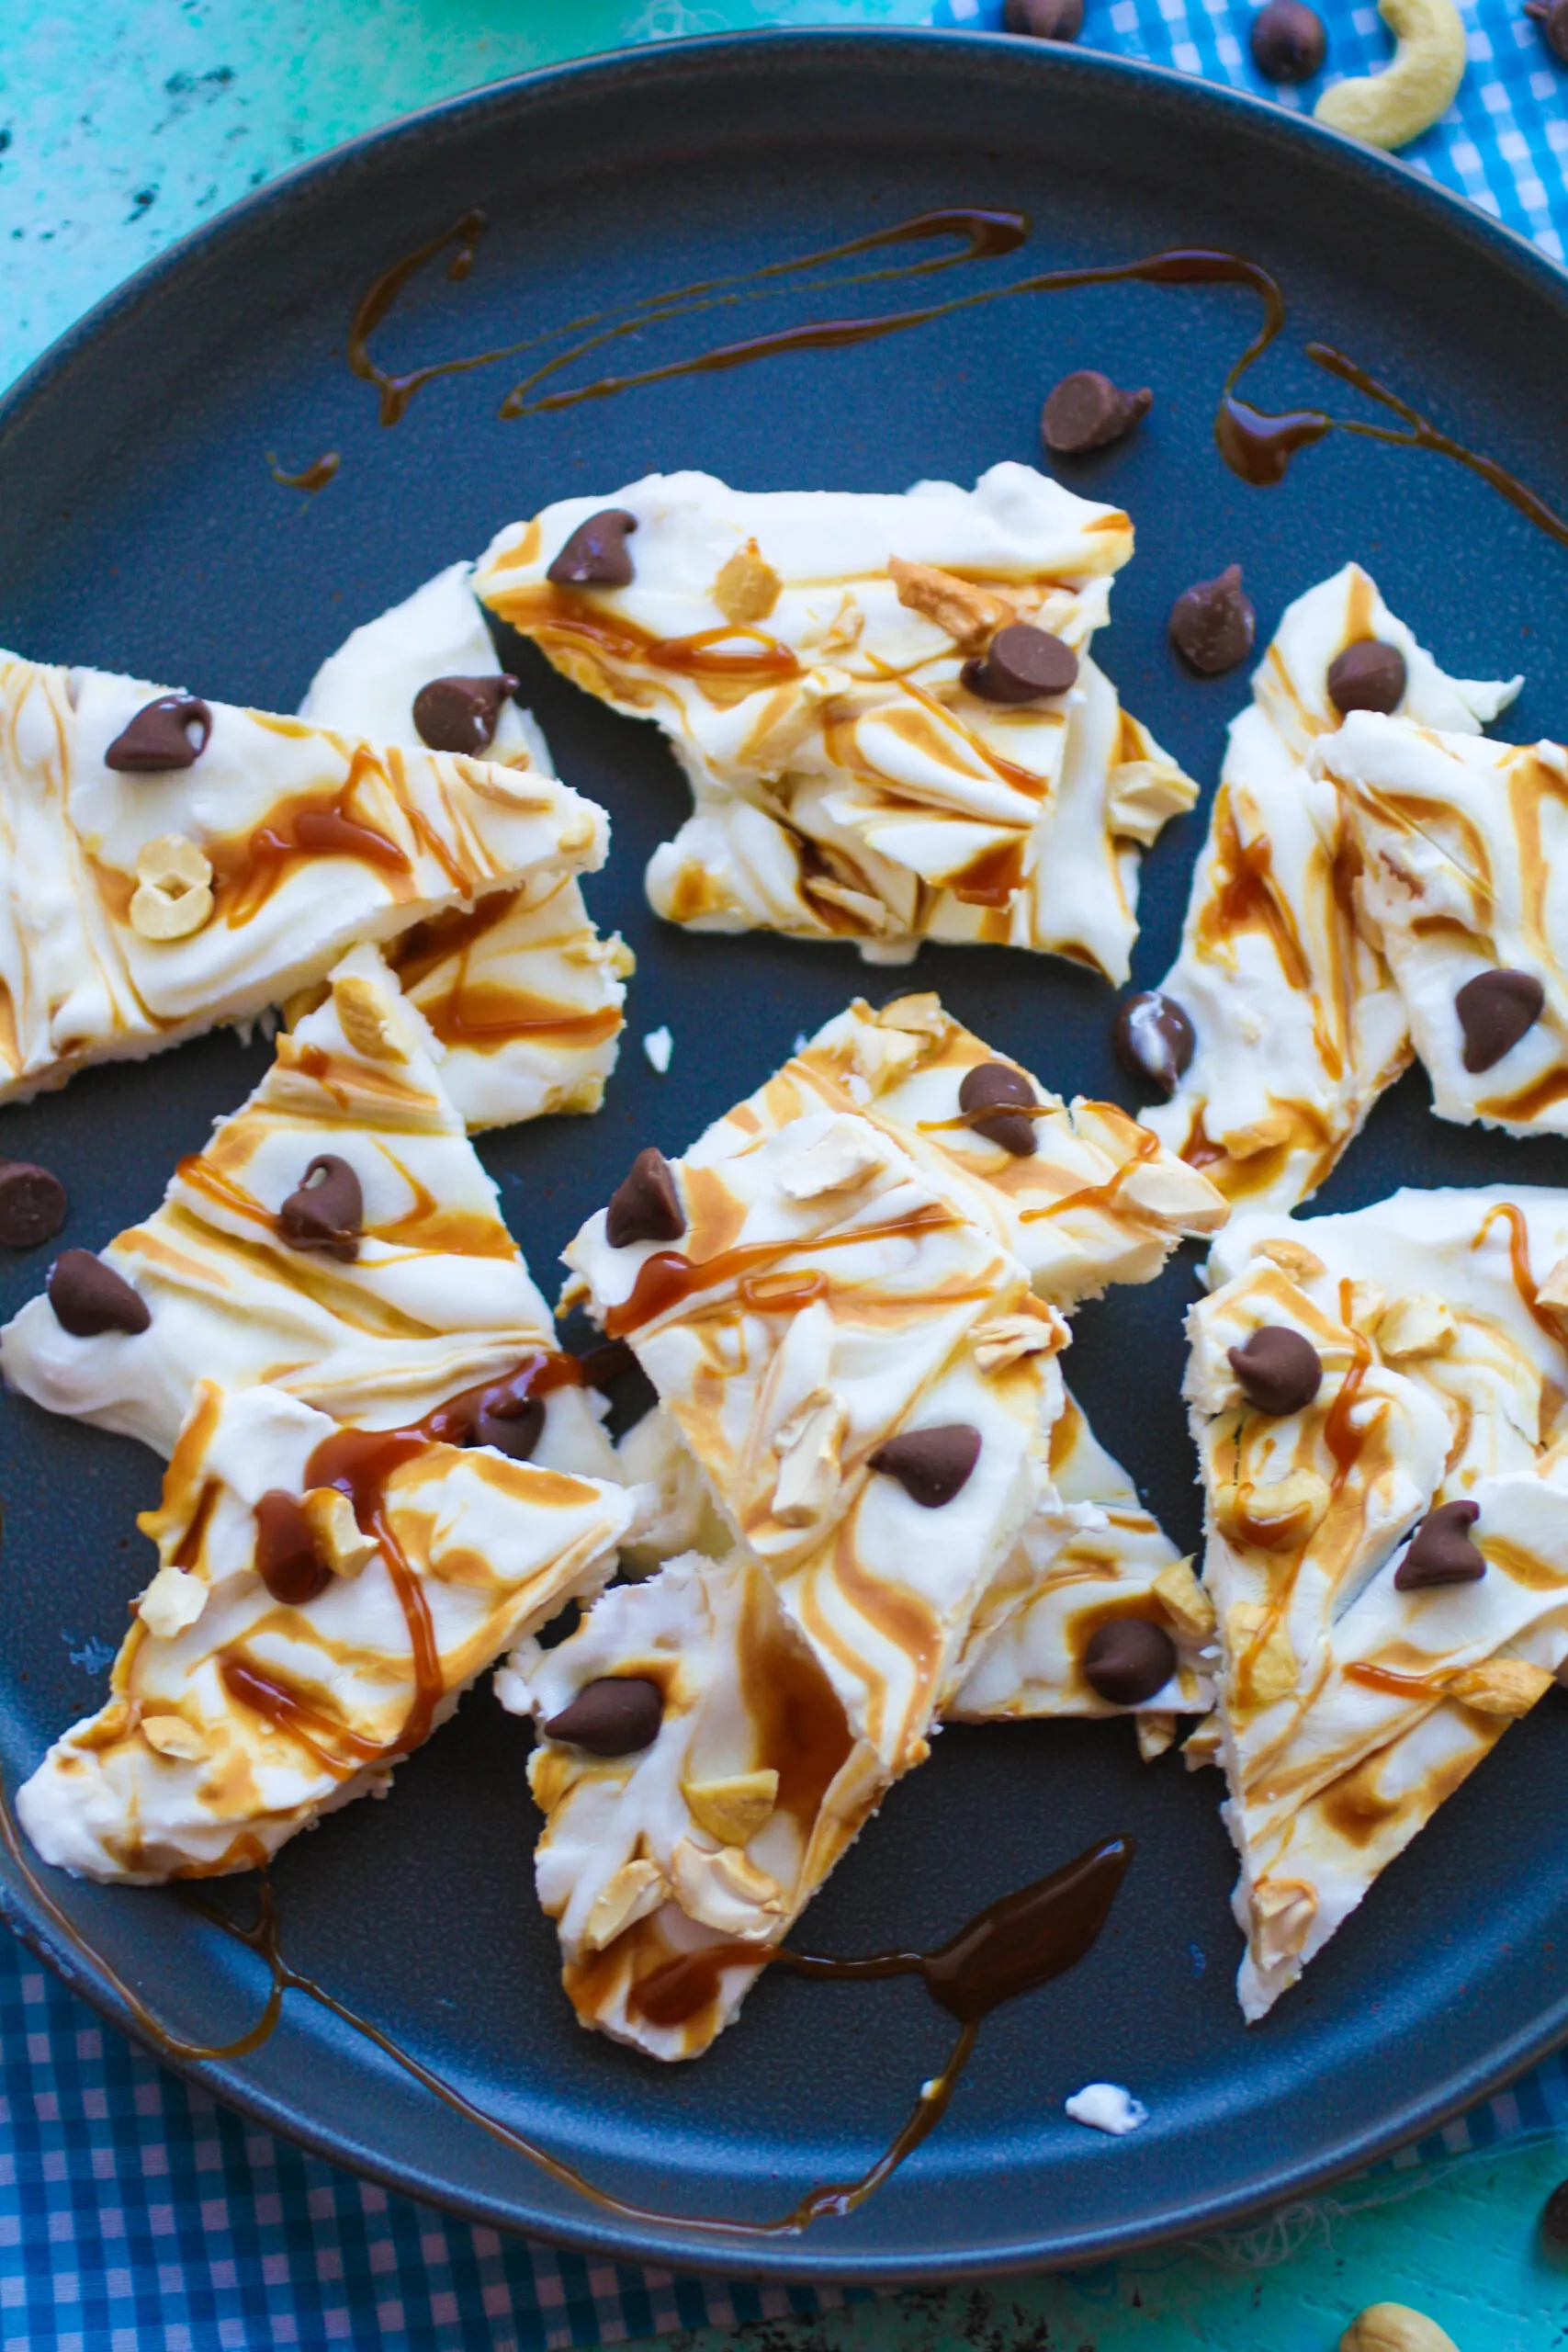 Frozen Yogurt Bark with Caramel, Cashews and Chocolate are piled high for you to enjoy for a frozen dessert!